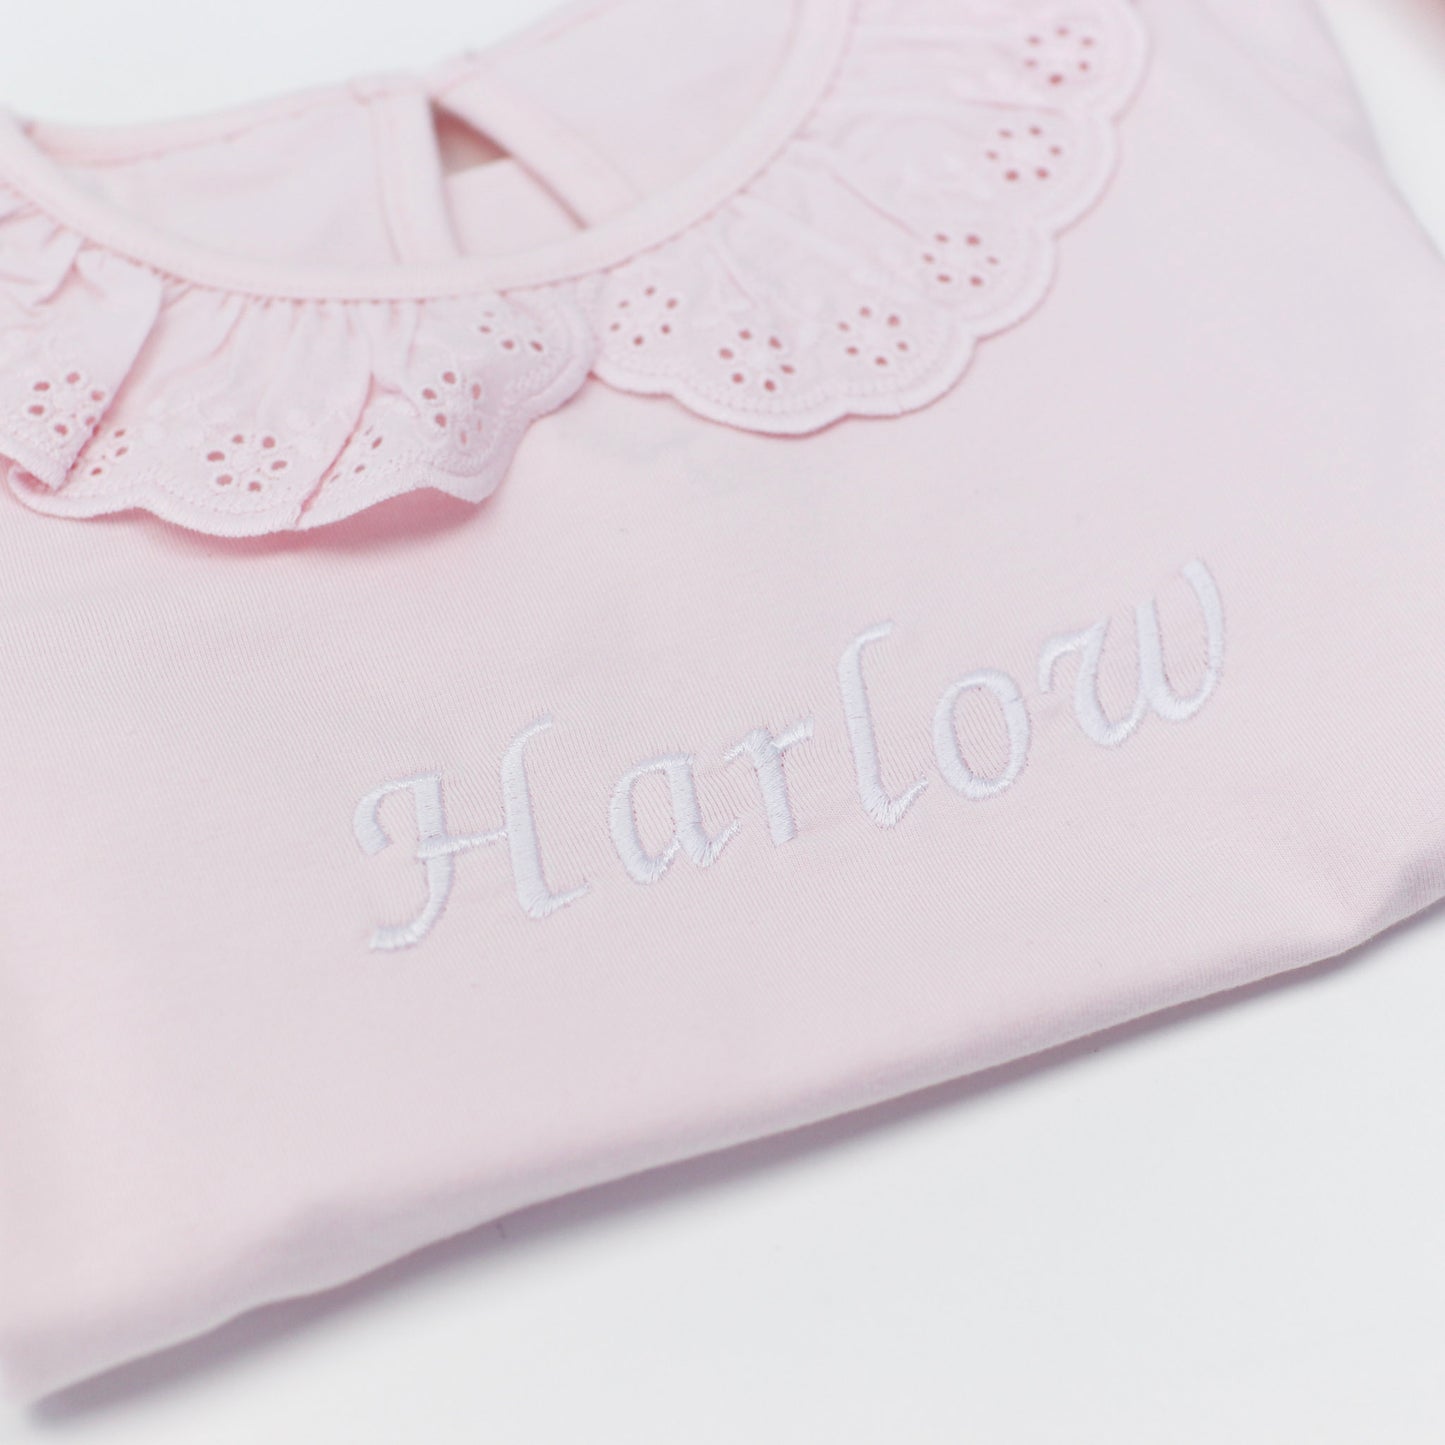 Embroidered Frilly Pj's